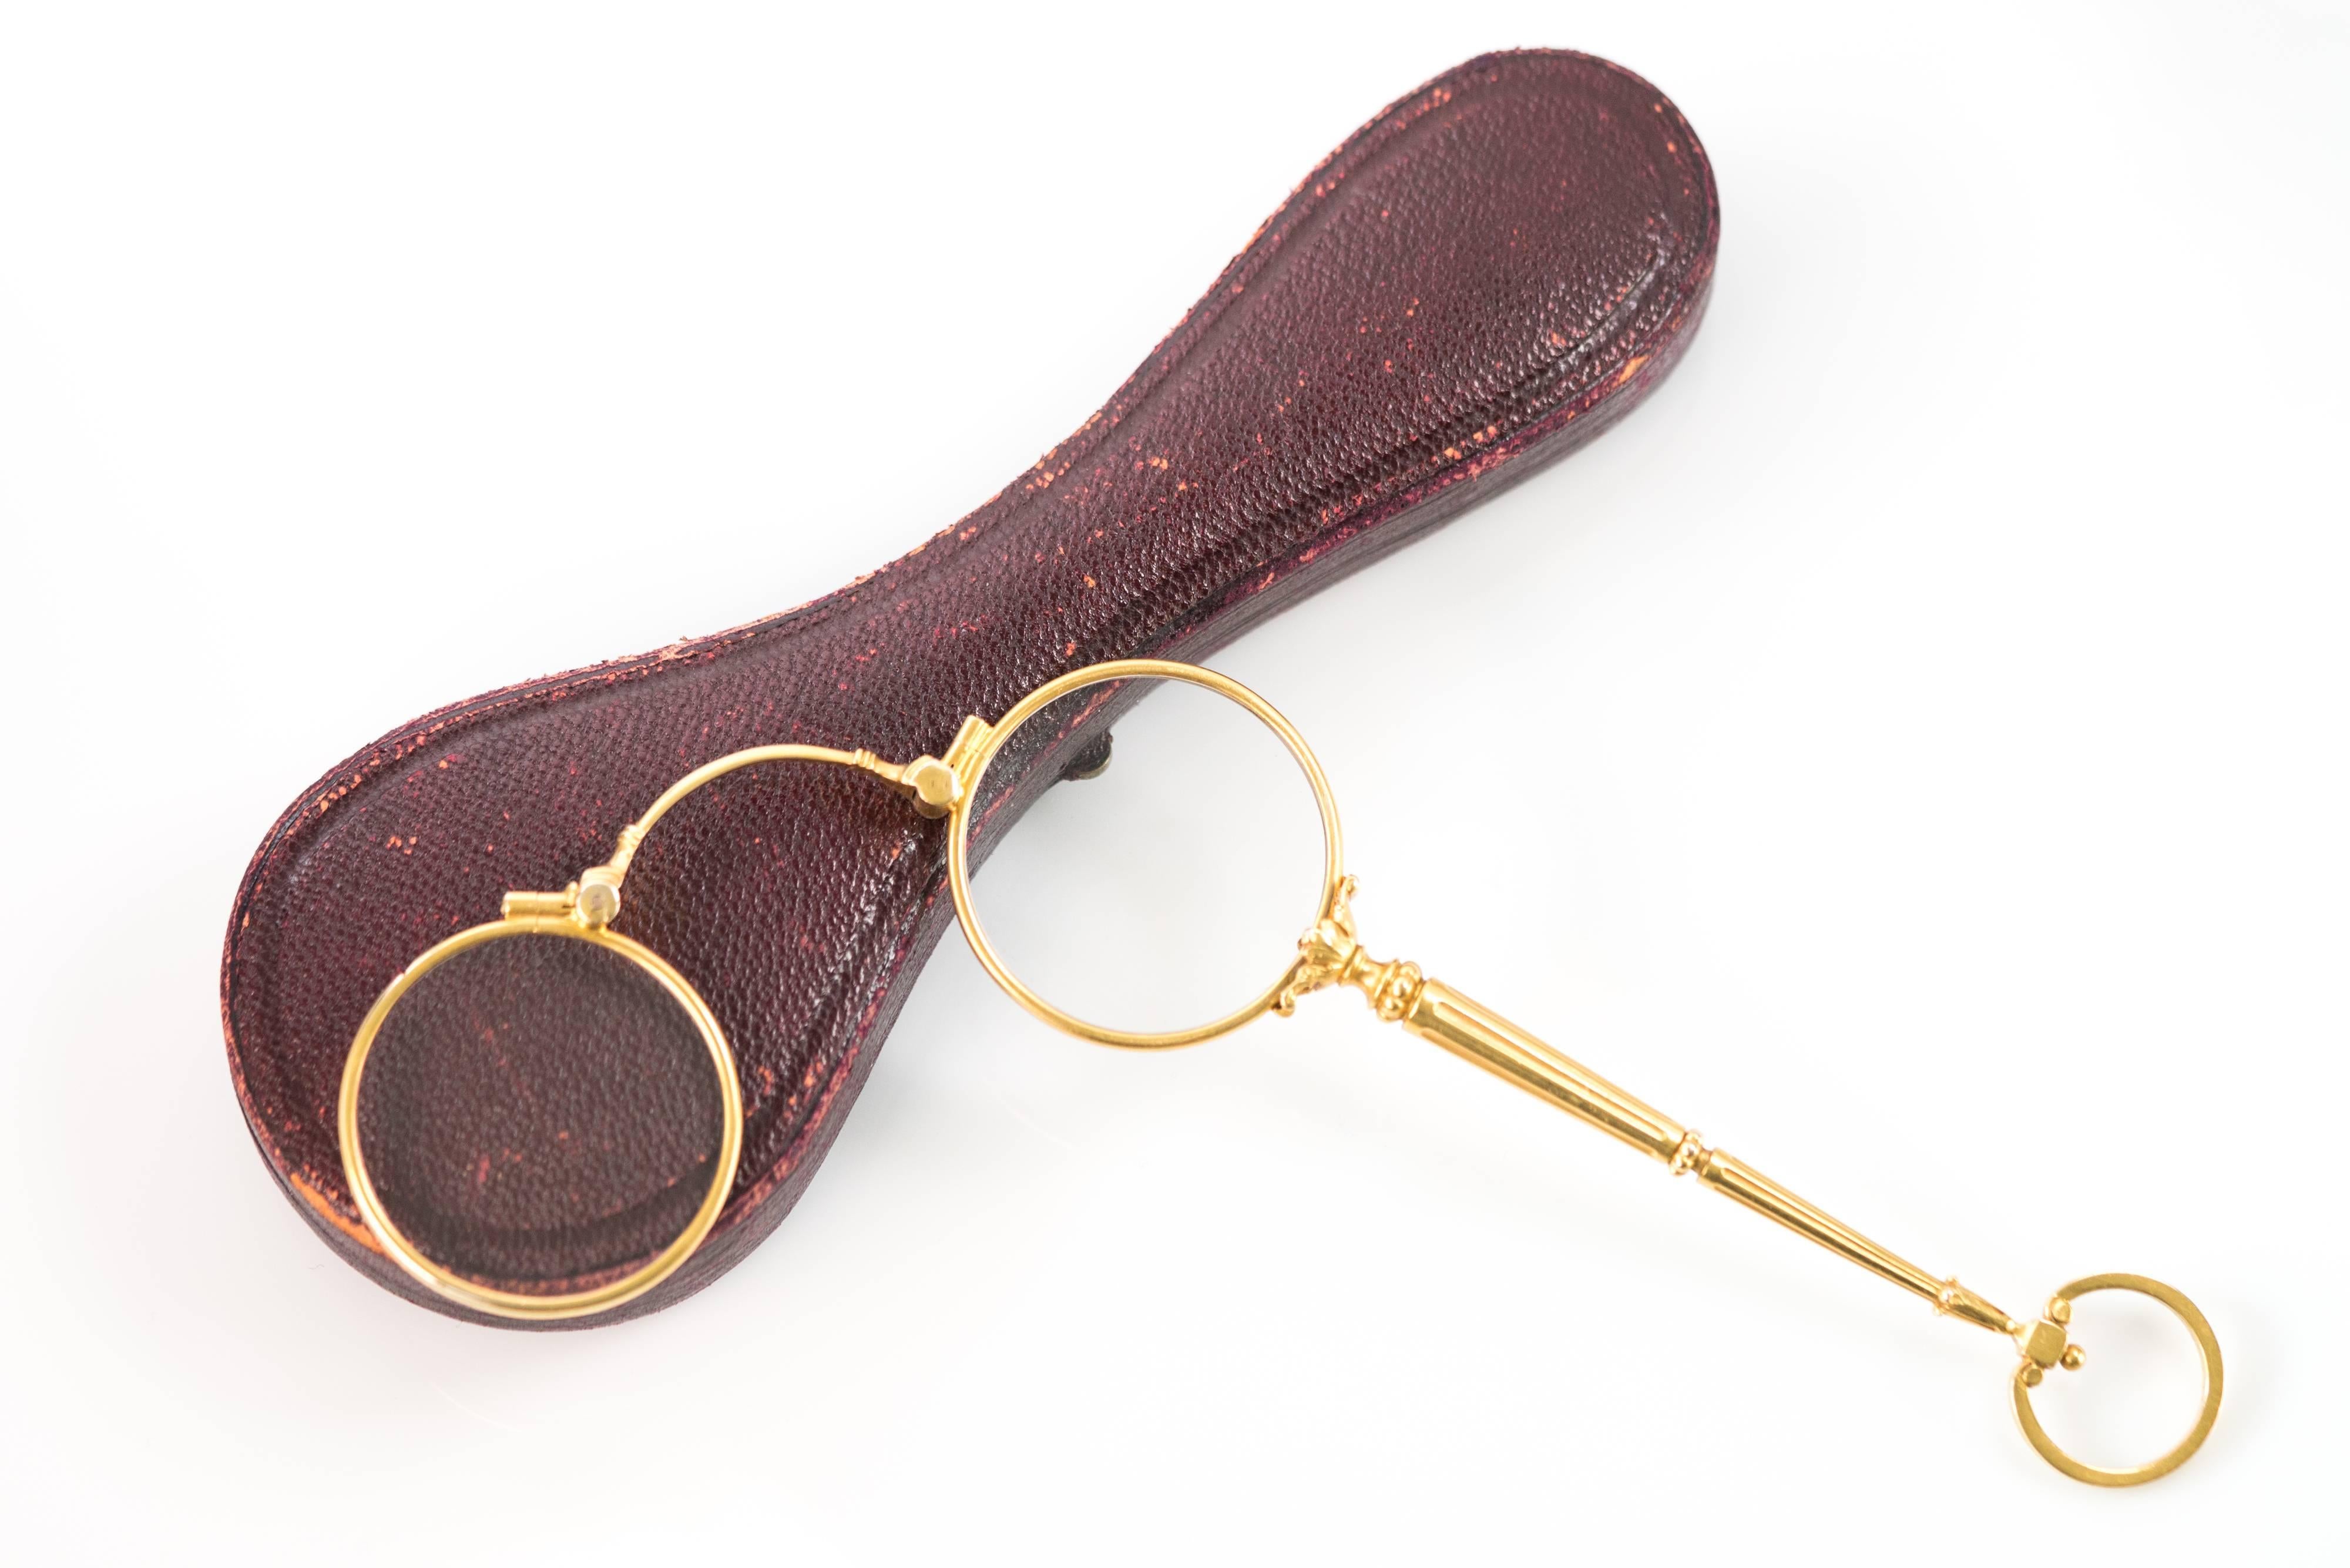 This turn-of-the-century pair of 14K Yellow Gold Curry and Paxton London Bifocal Lorgnette Spectacles comes in the original burgundy leather and purple velvet, hinged, locking case. A delicate and decorative pull lever in the center of the handle